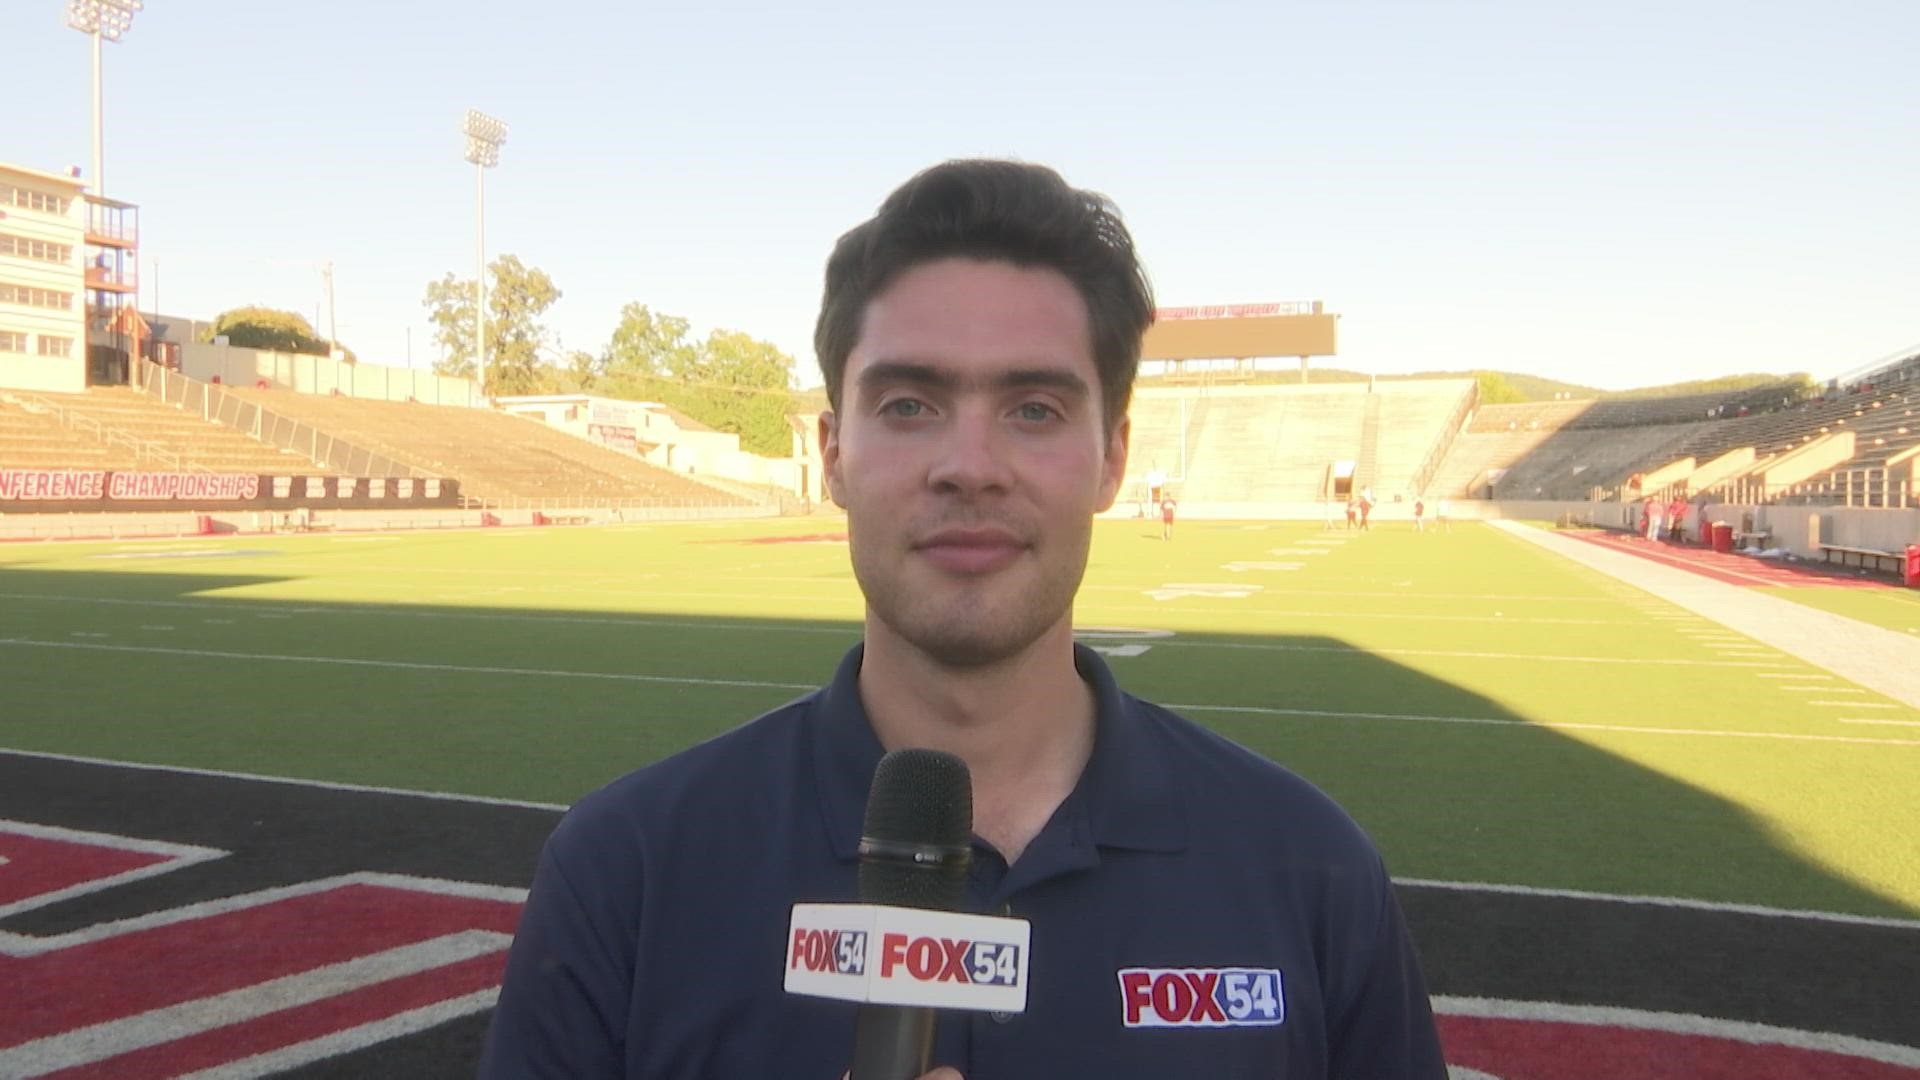 FOX54 Sports' Simon Williams recaps Jax State's win over Kennesaw State in the ASUN opener.